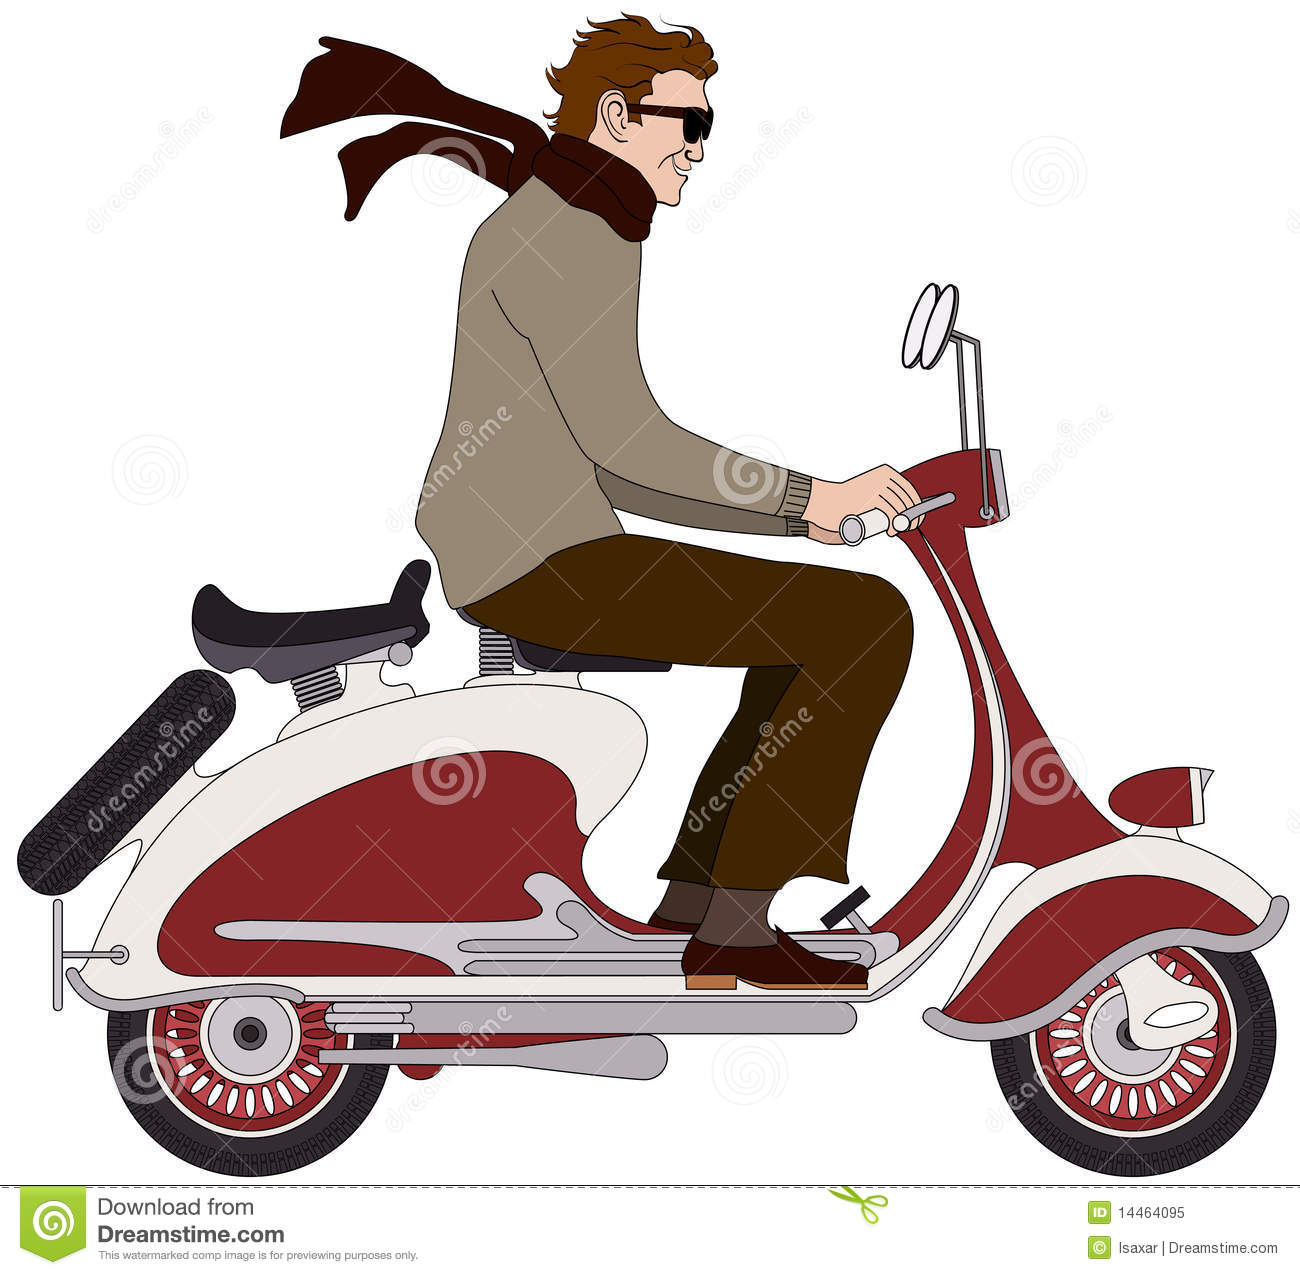 Italian Boy On A Scooter Royalty Free Stock Photo   Image  14464095